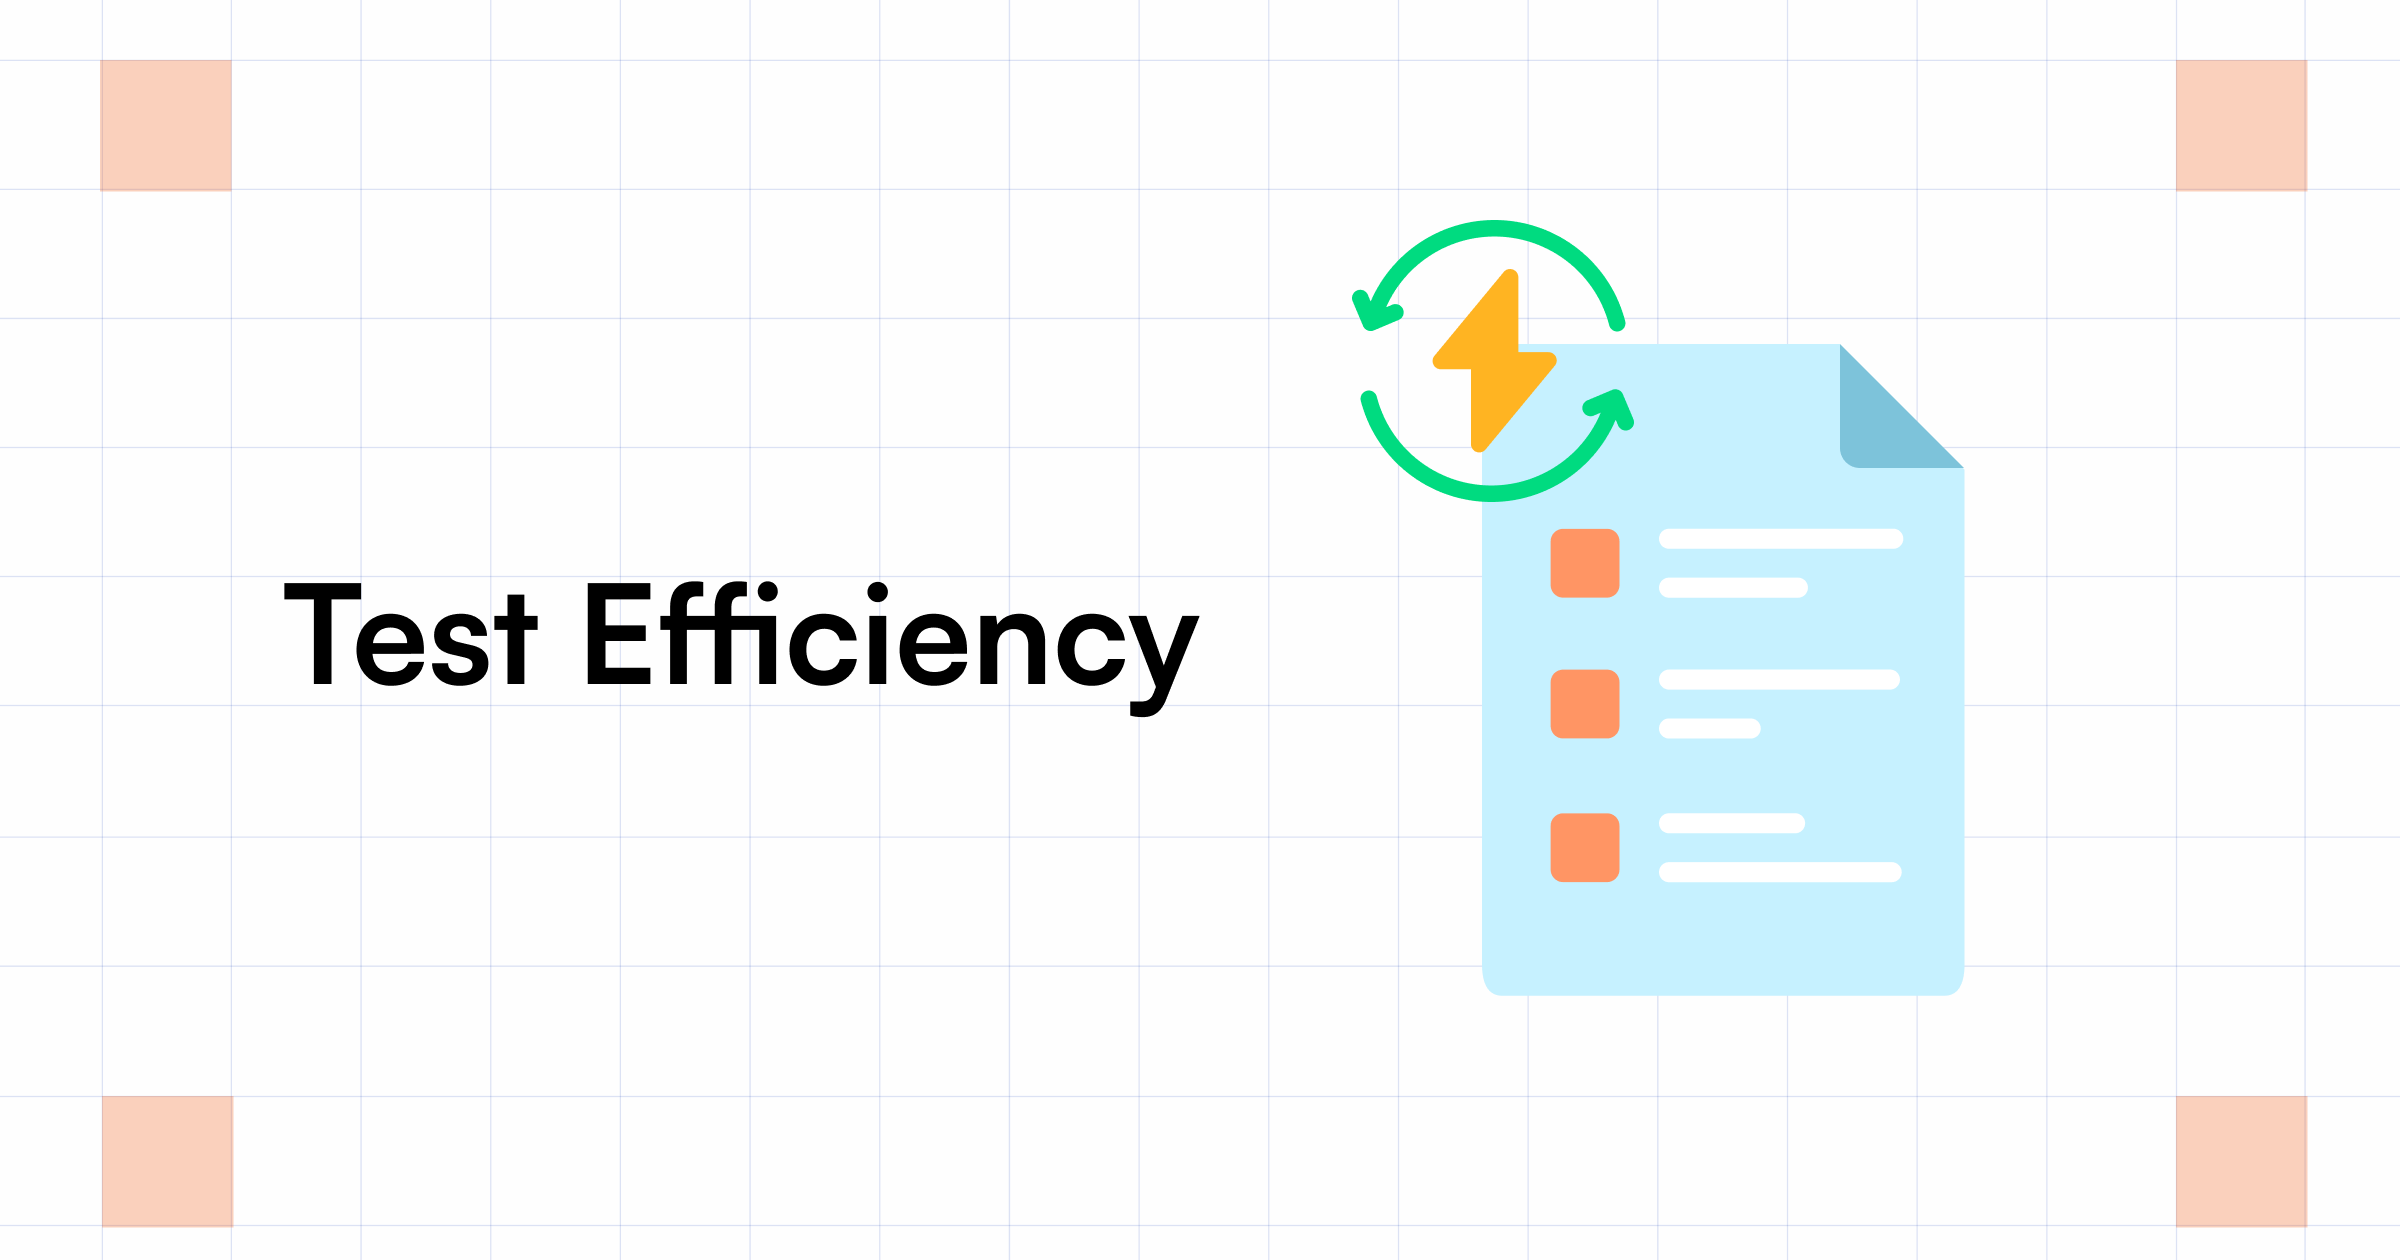 Test Efficiency How It Differs From Test Effectiveness